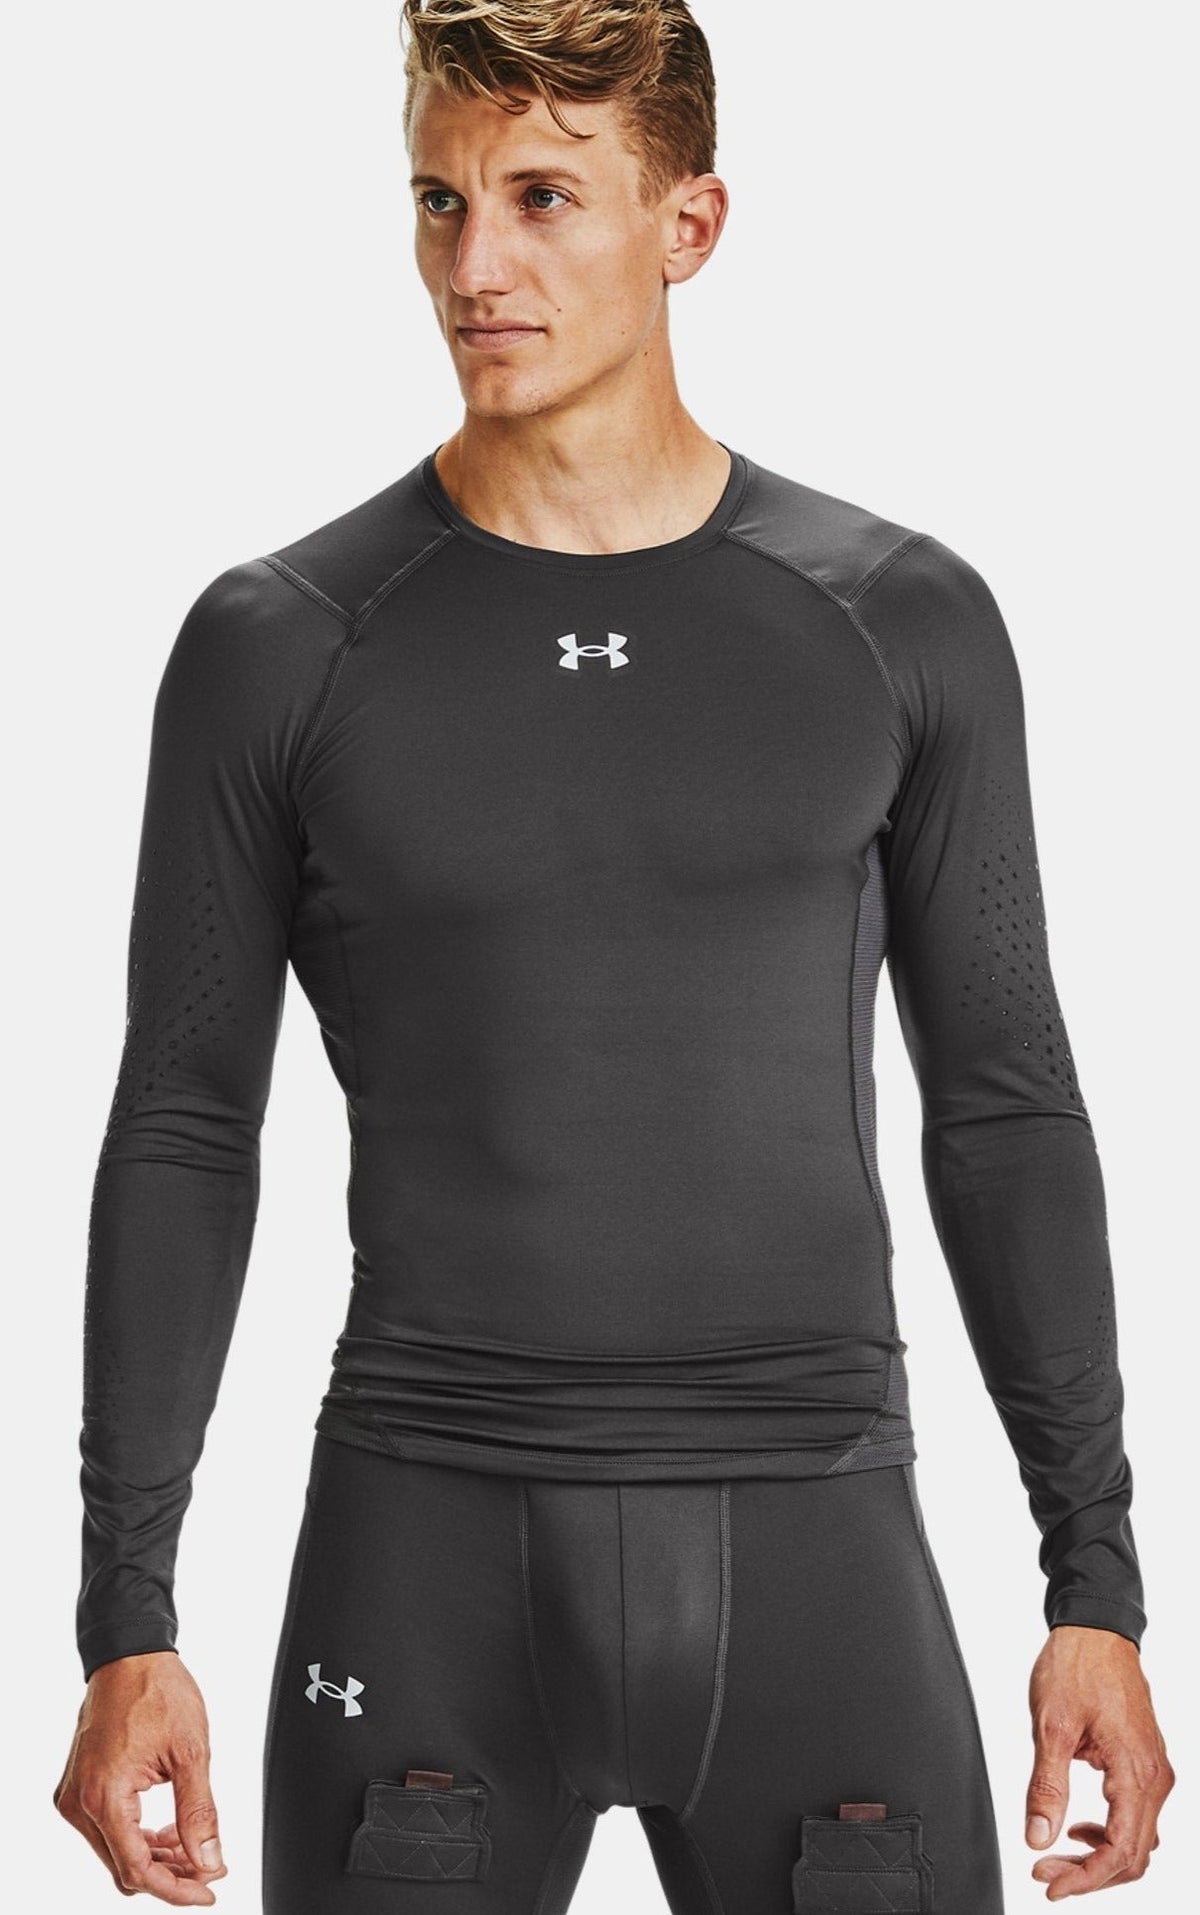 Under Armour Men's Fitted Grippy Long Sleeve